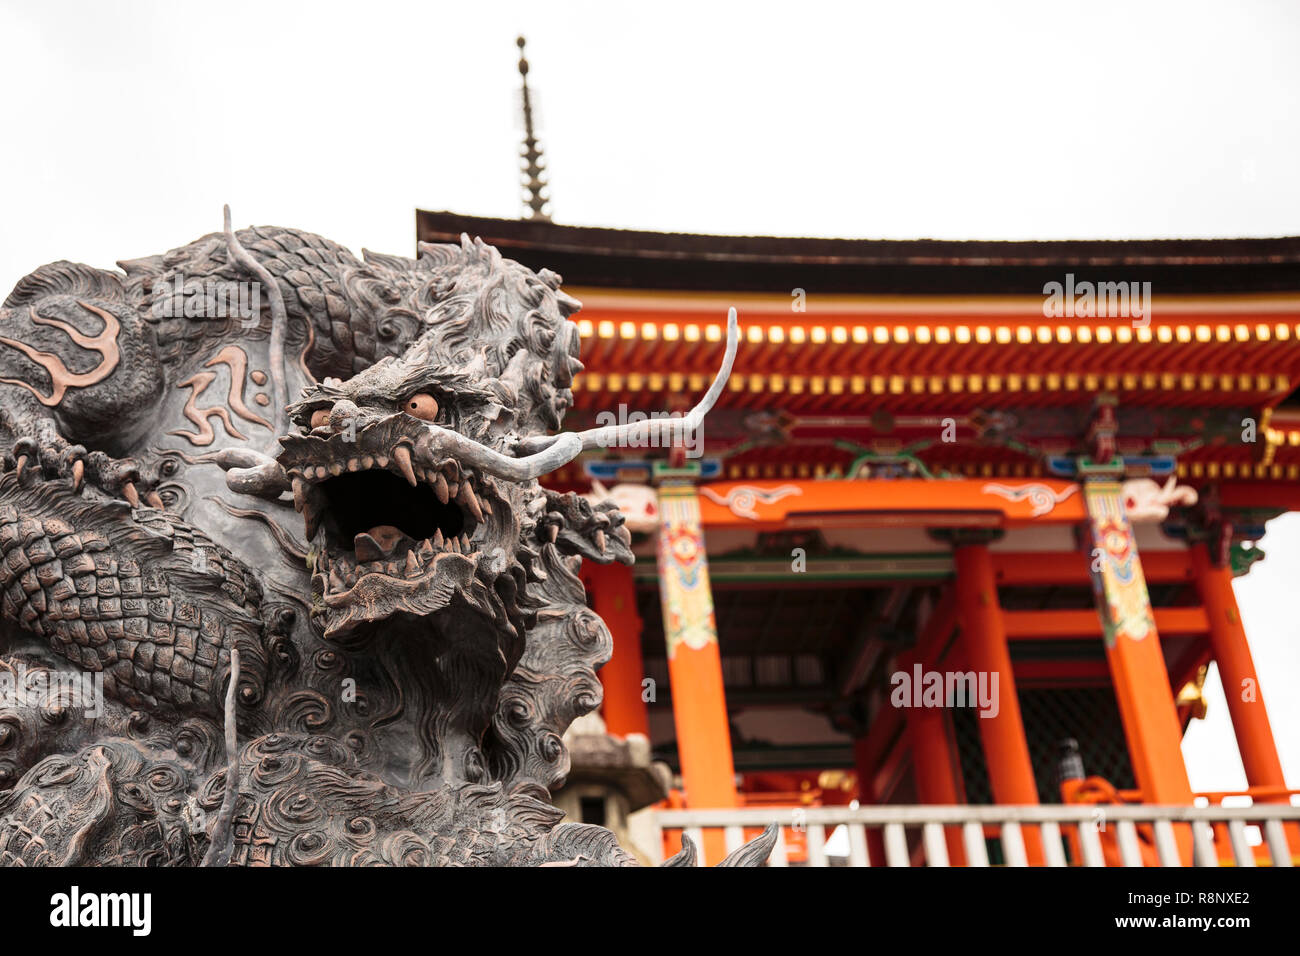 Imposing dragon sculpture on the steps of a gate at Kiyomizu-dera temple in Kyoto. Stock Photo